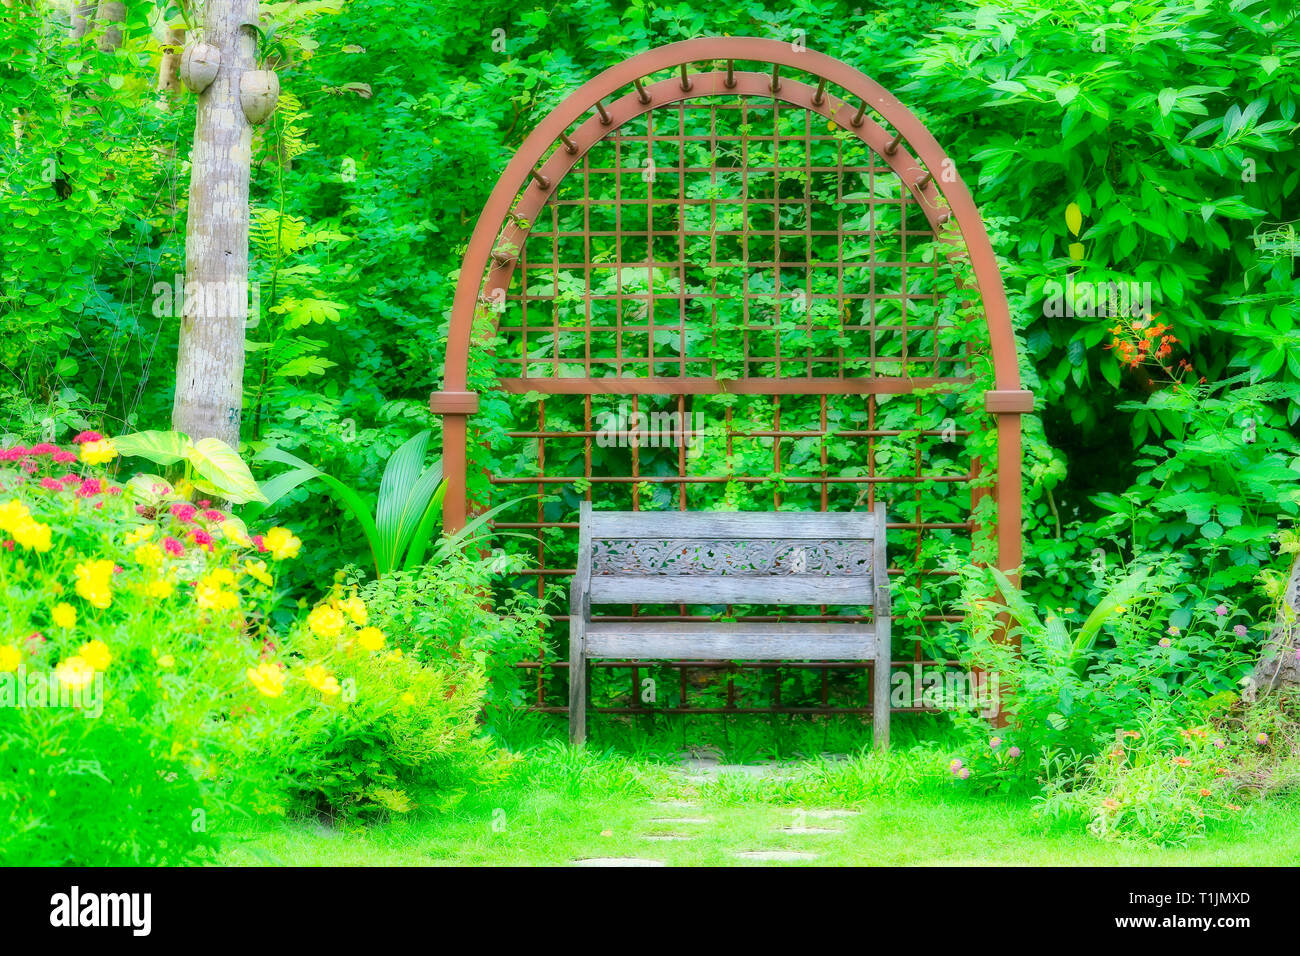 This unique picture shows a fairytale garden with an old park bench. This picture was taken in the Maldives Stock Photo